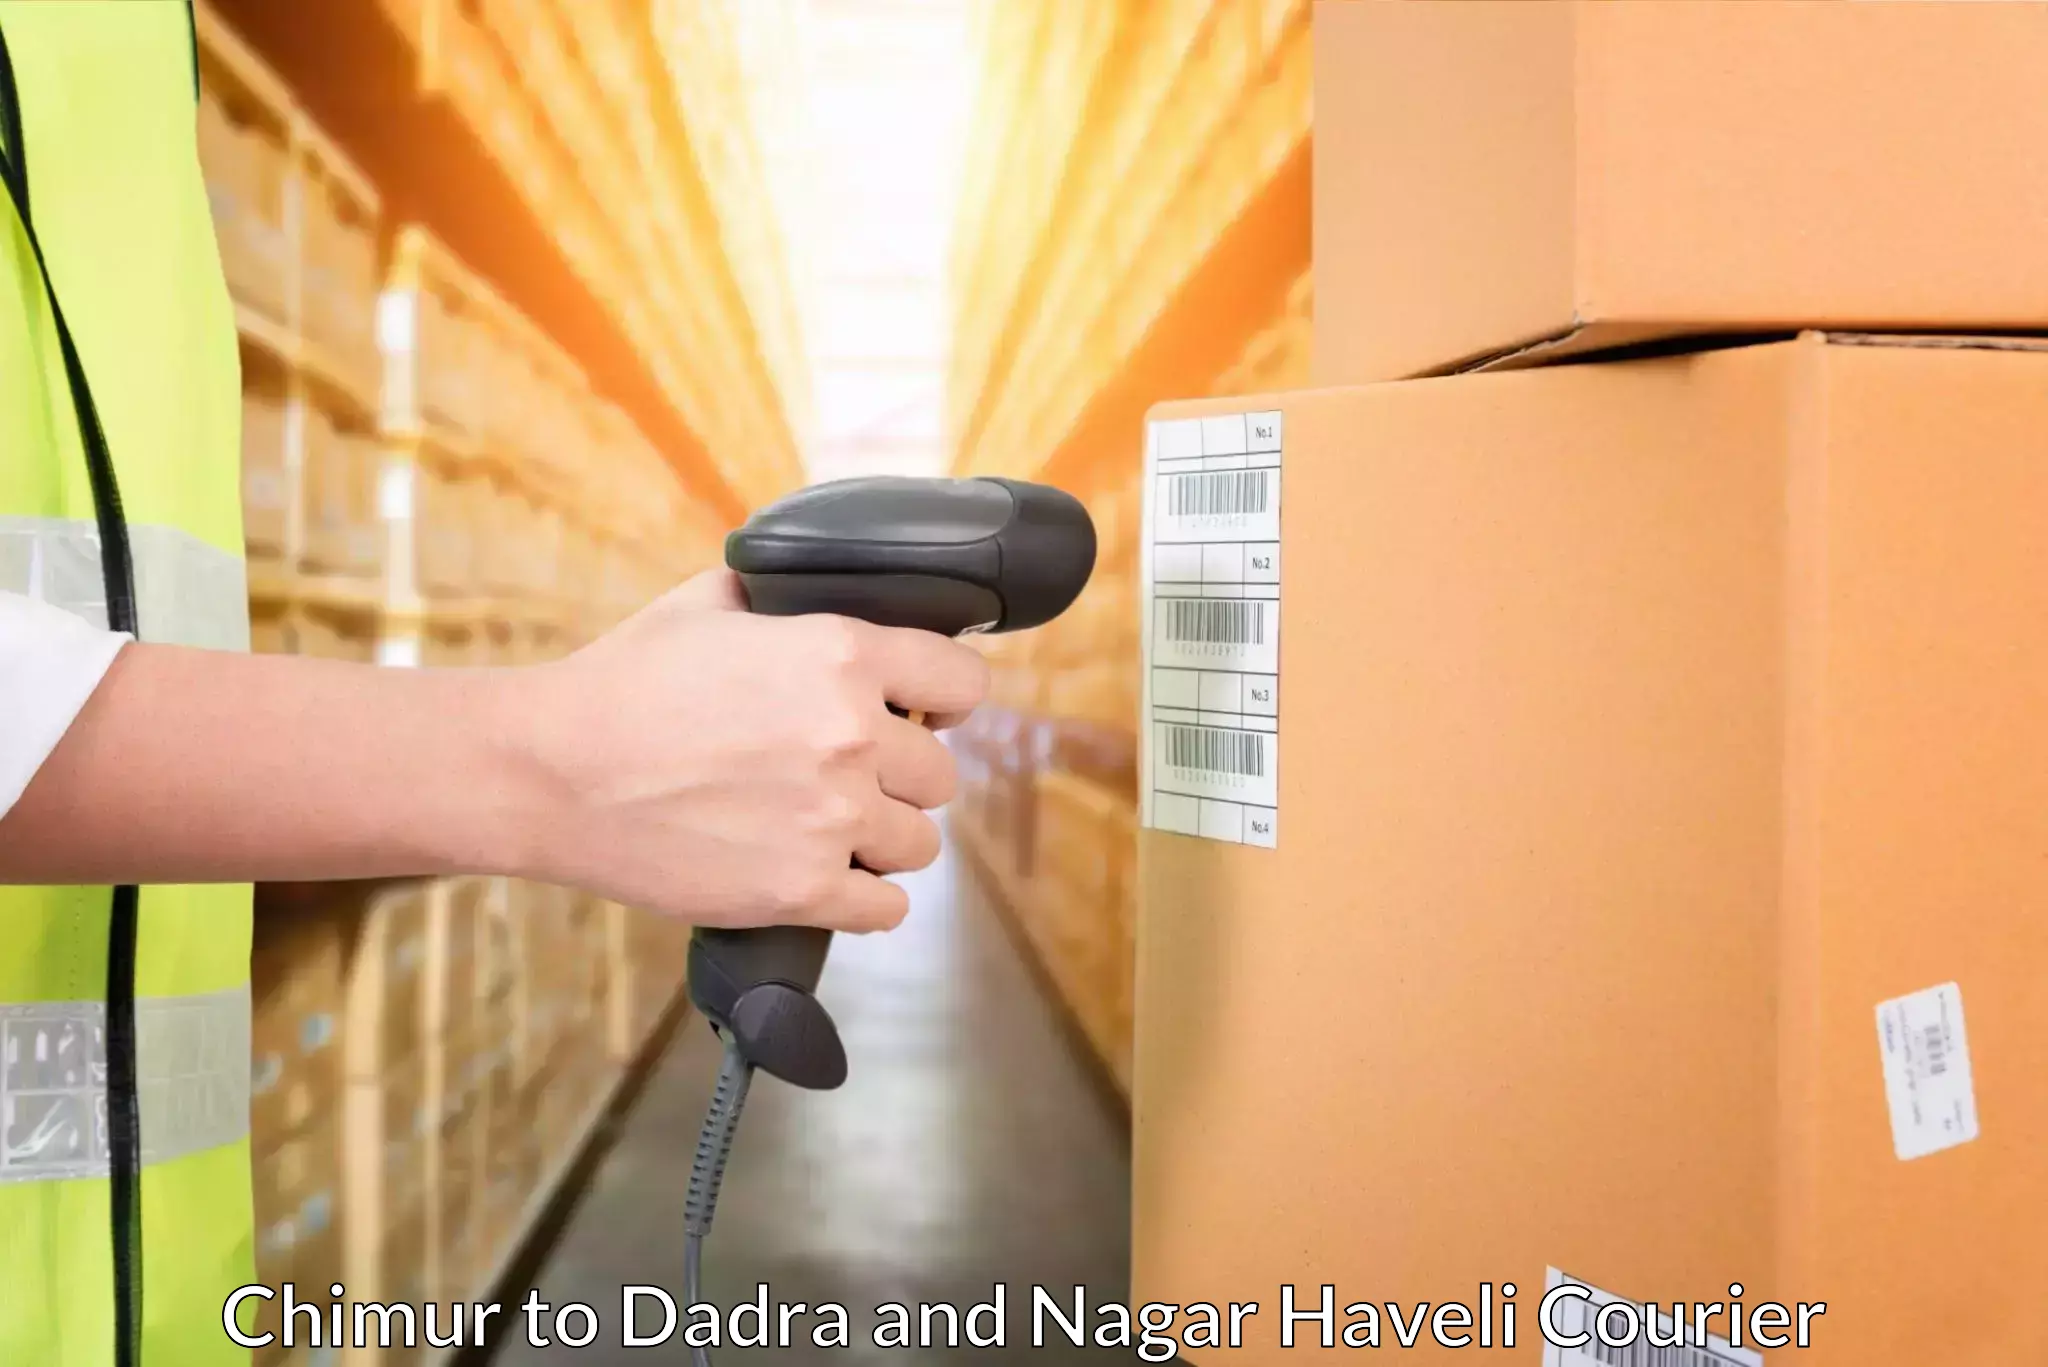 Courier service efficiency Chimur to Dadra and Nagar Haveli